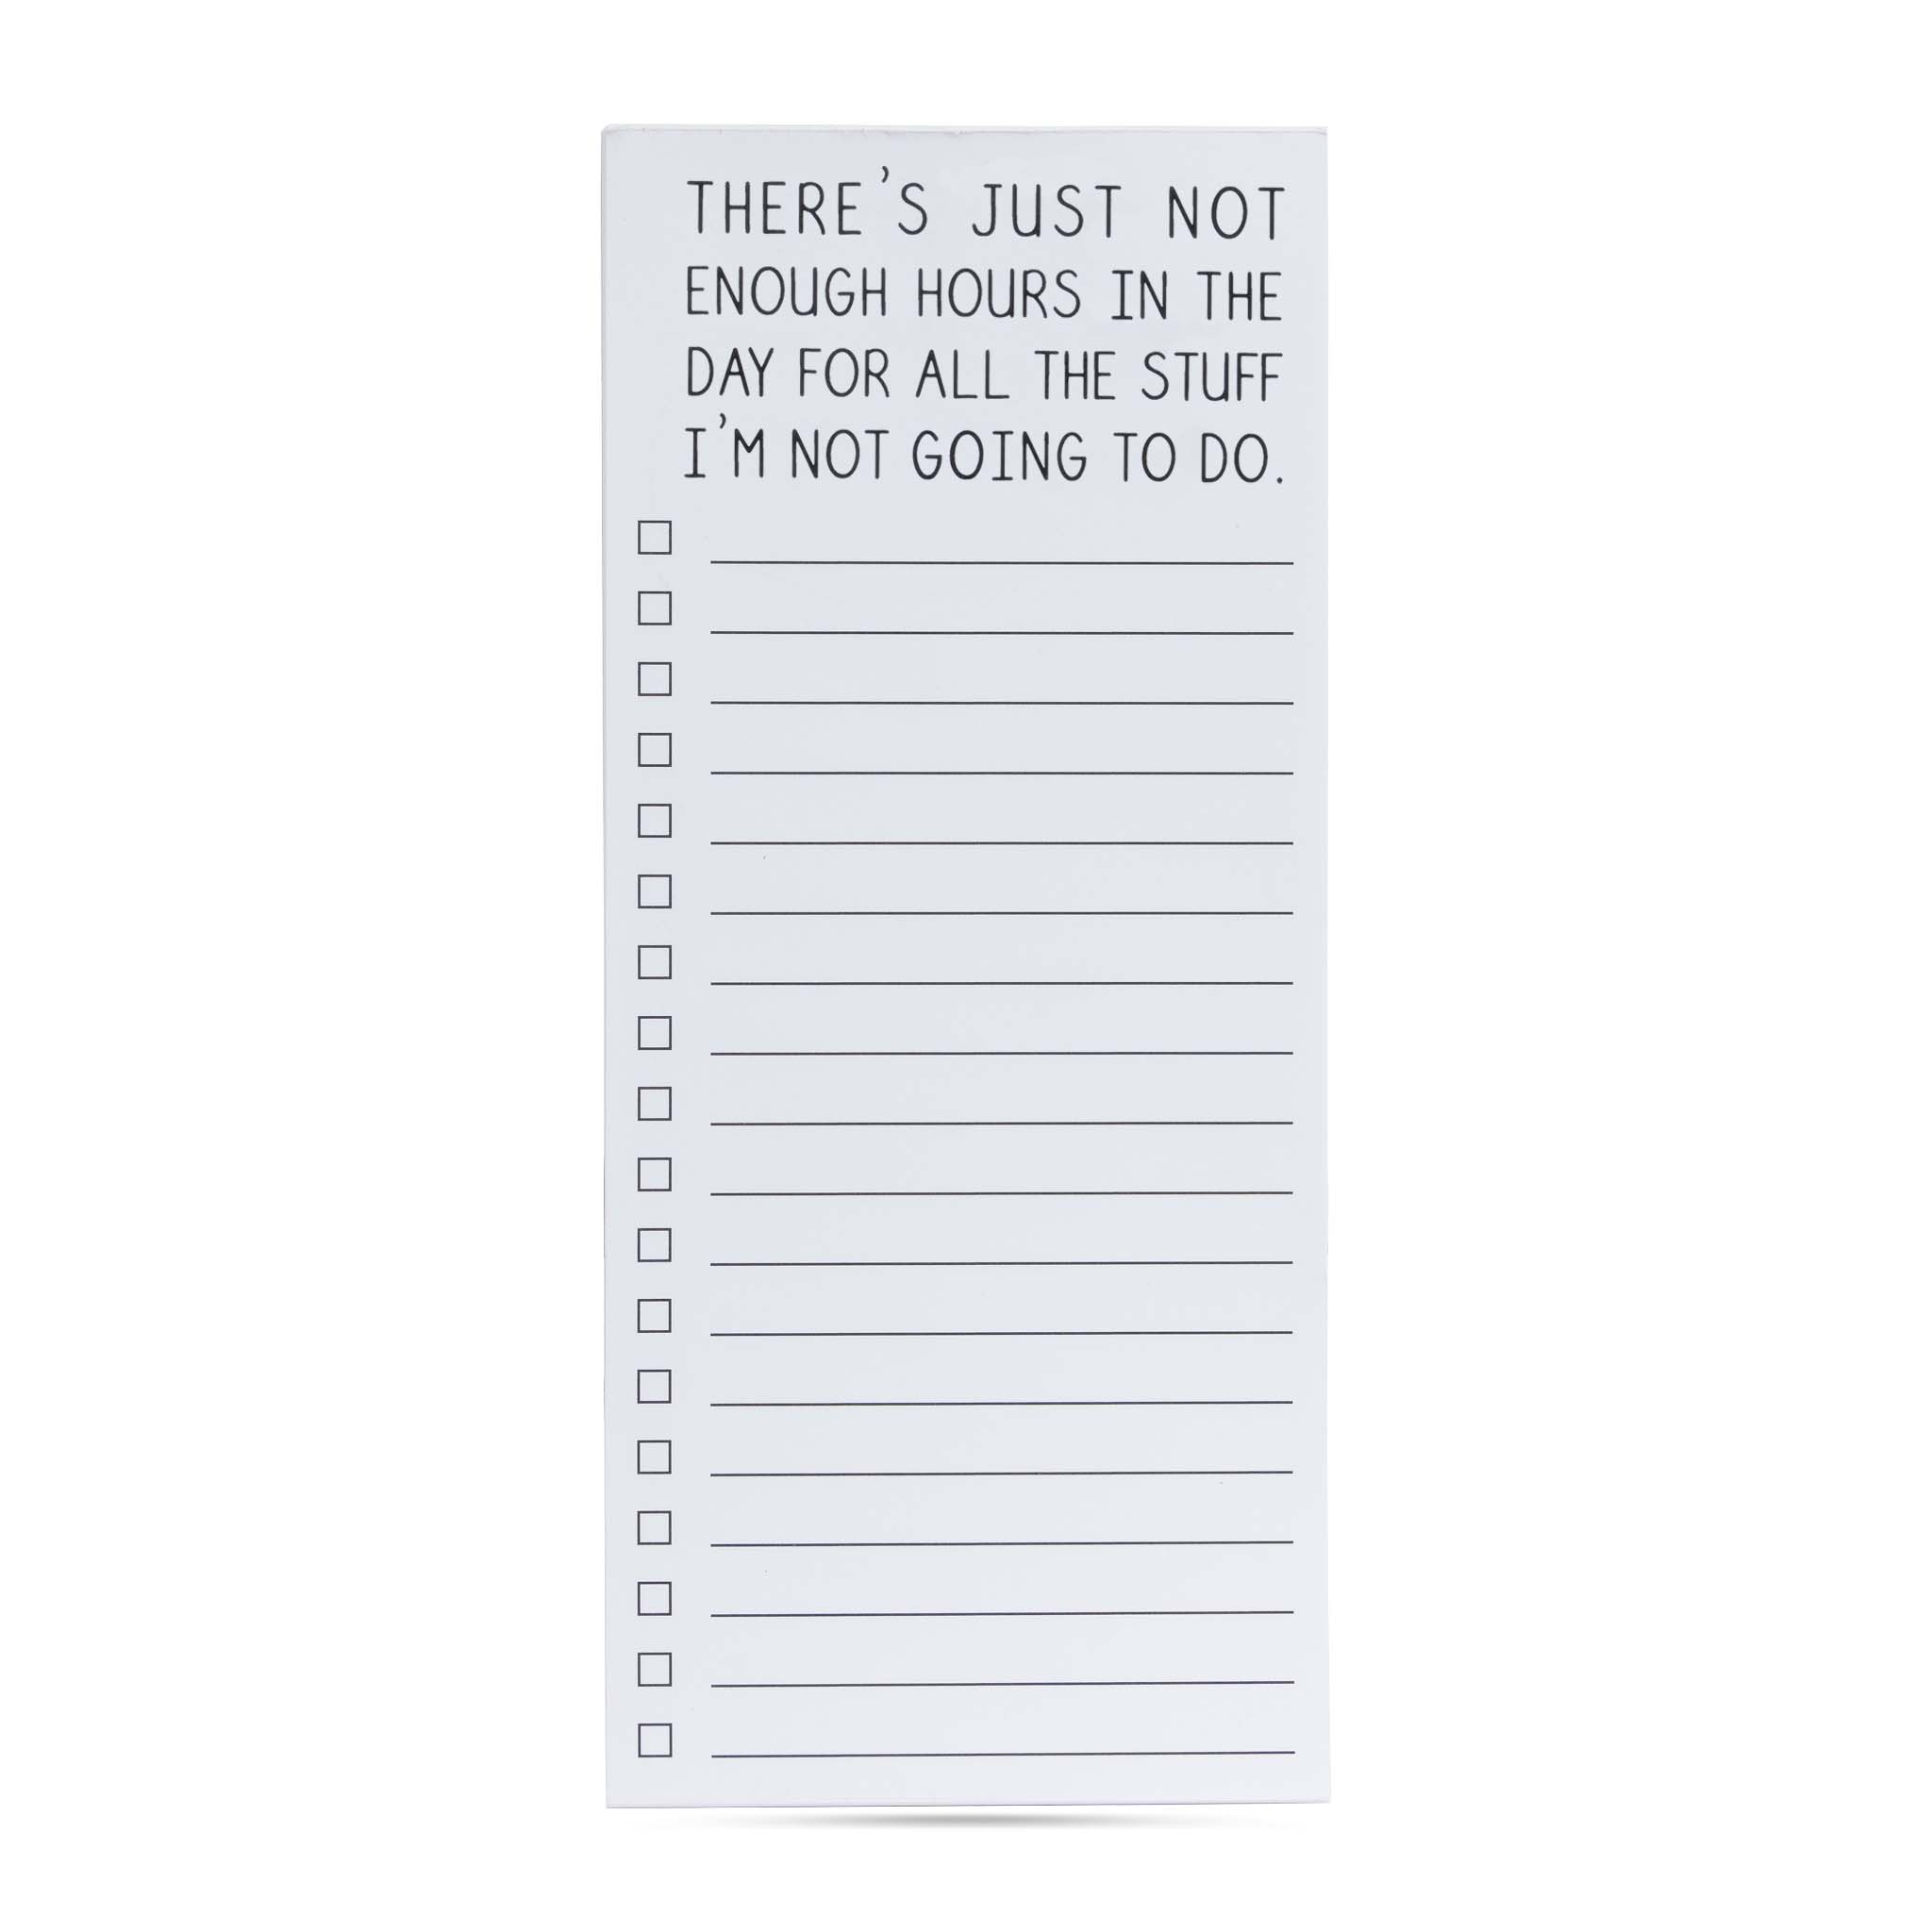 There's just not enough hours in the day for all the stuff I'm not going to do list pad